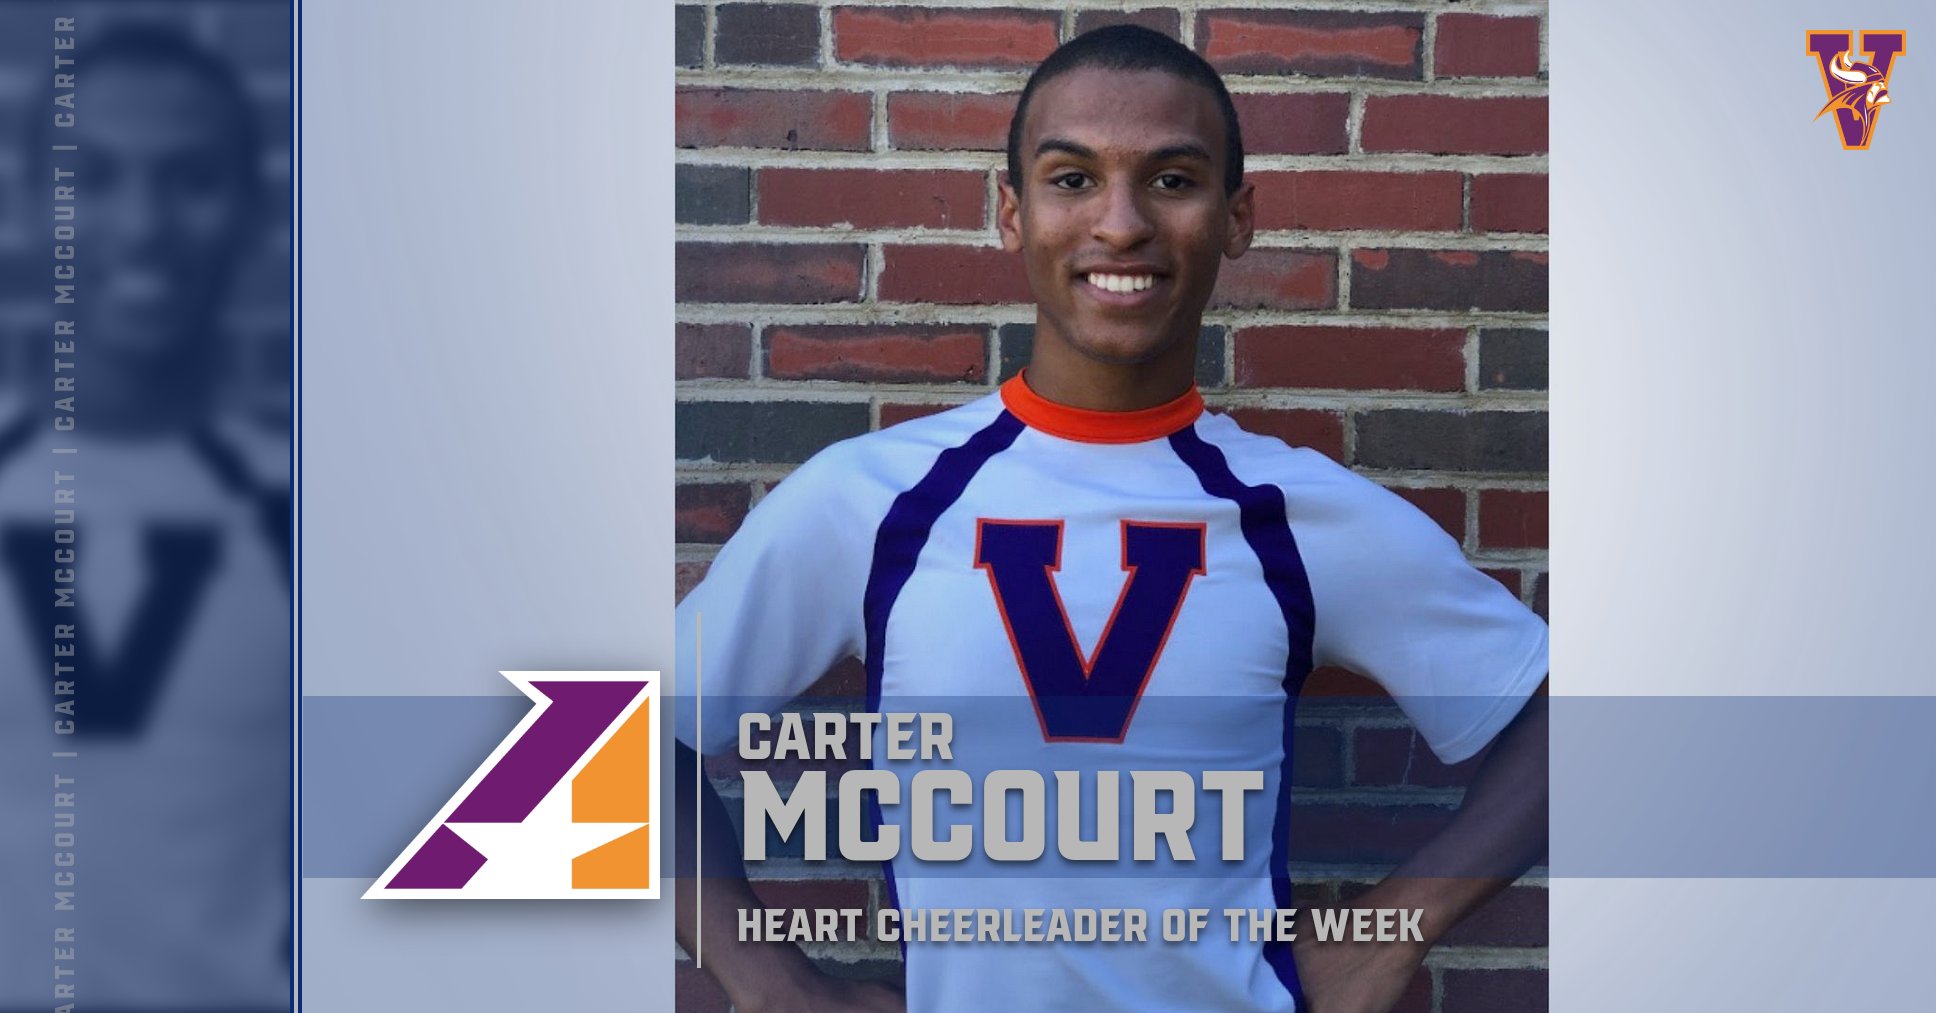 Missouri Valley&rsquo;s Carter McCourt Named Heart Cheerleader of the Week